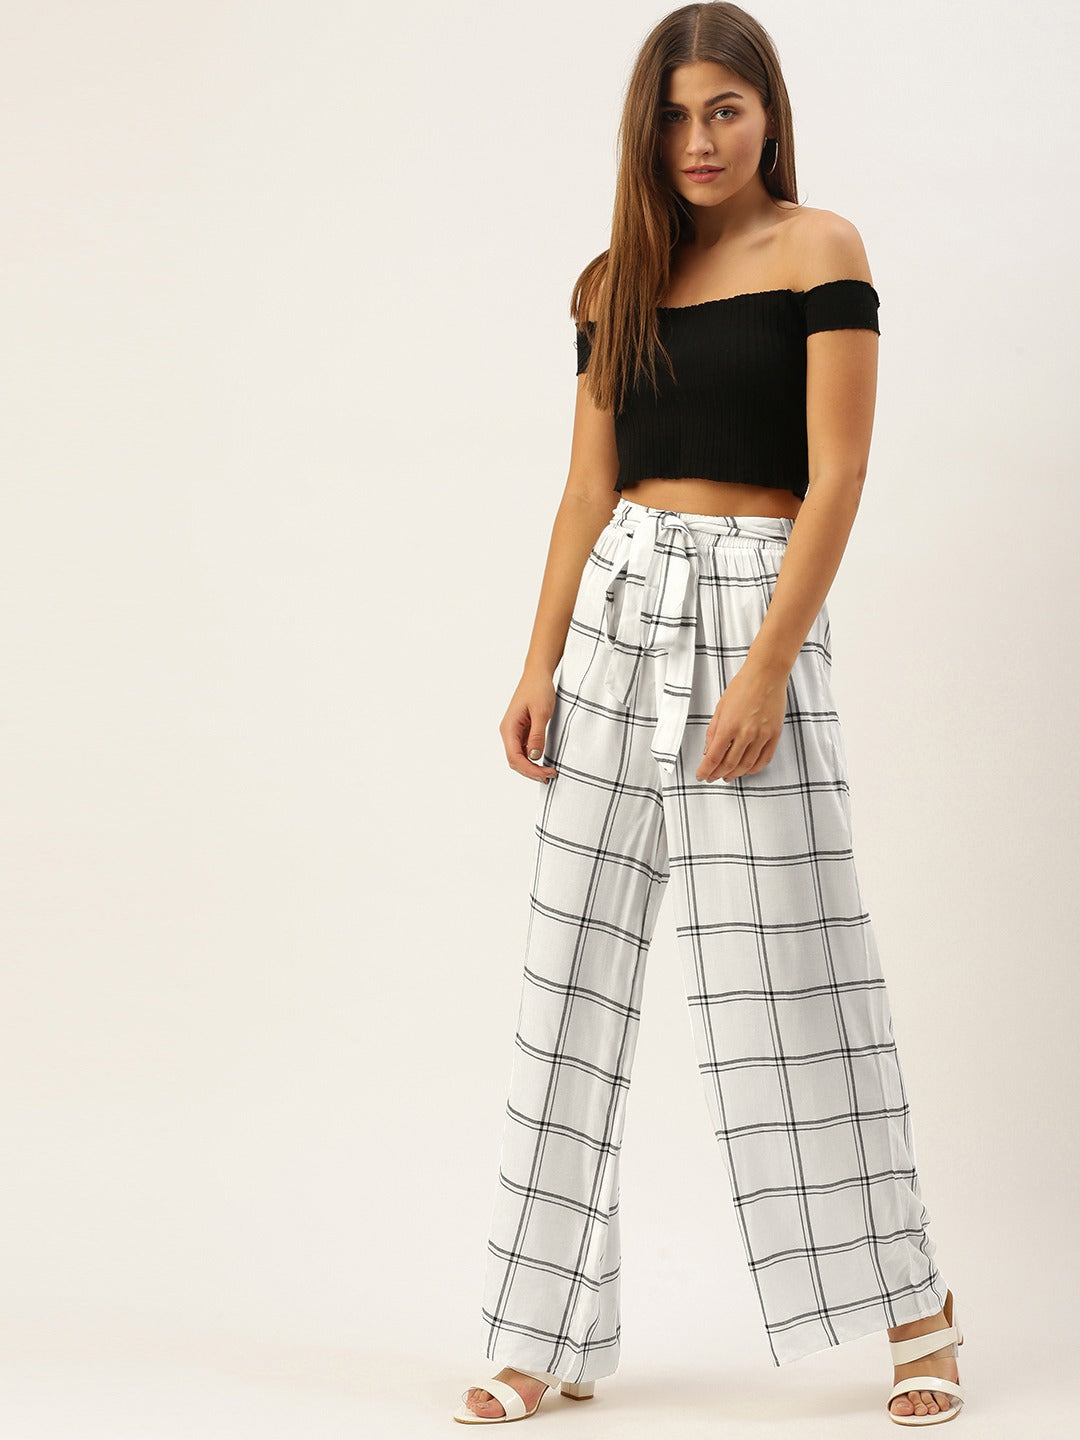 Buy Black and White Essential Comfort Check Formal Pants Online   FableStreet